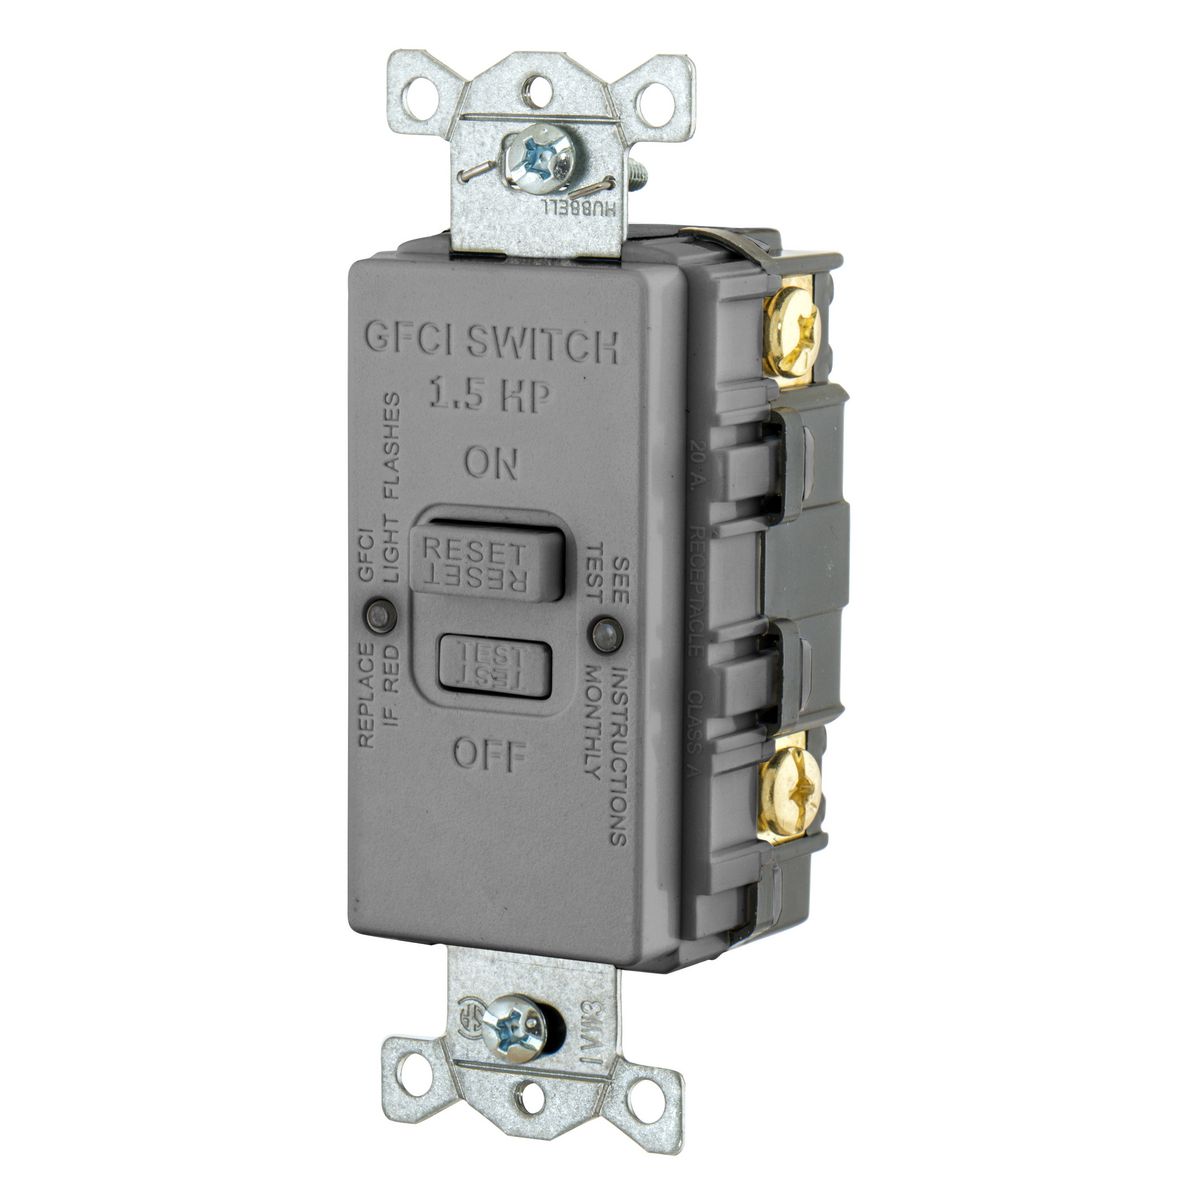 Hubbell Wiring Device Kellems, Power Protection Products, GFCI,Receptacle, Blank Face, 20A 125V, HP Rated, Gray